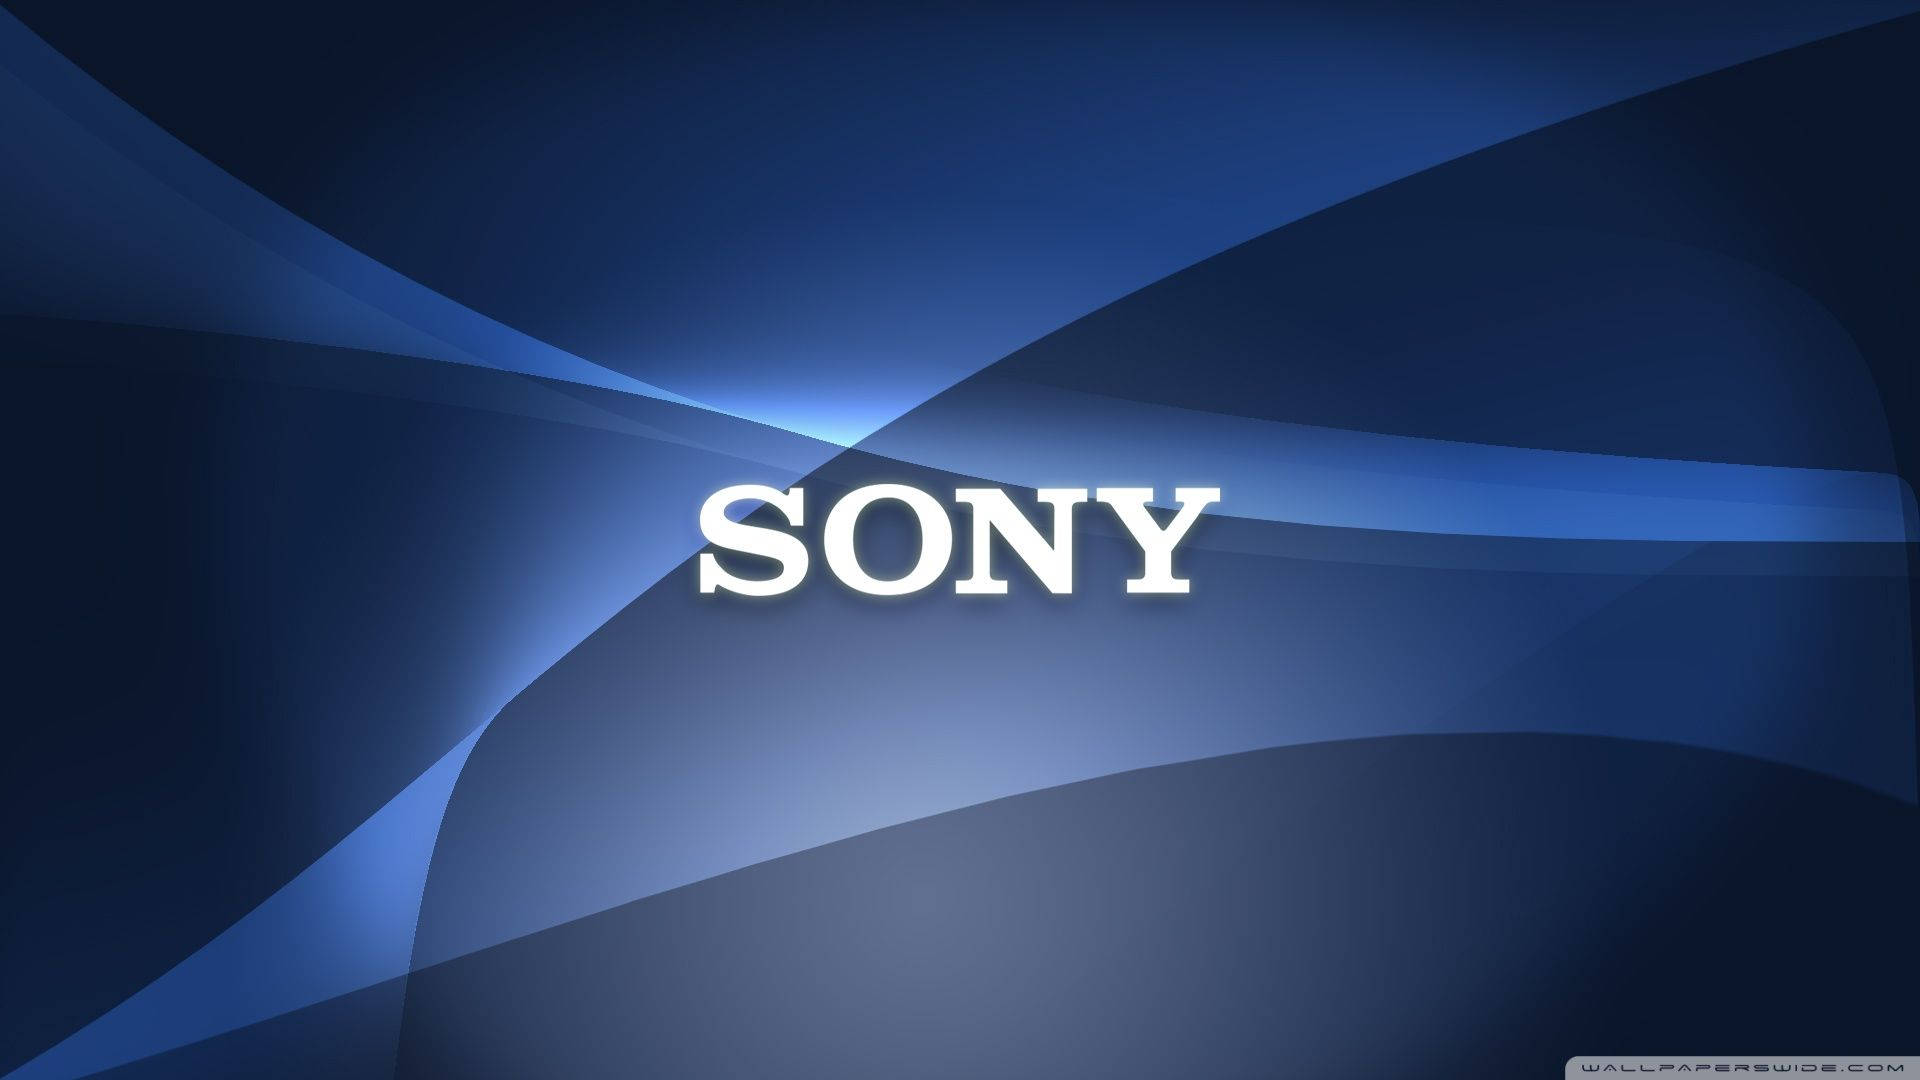 Sony Blue-themed Background